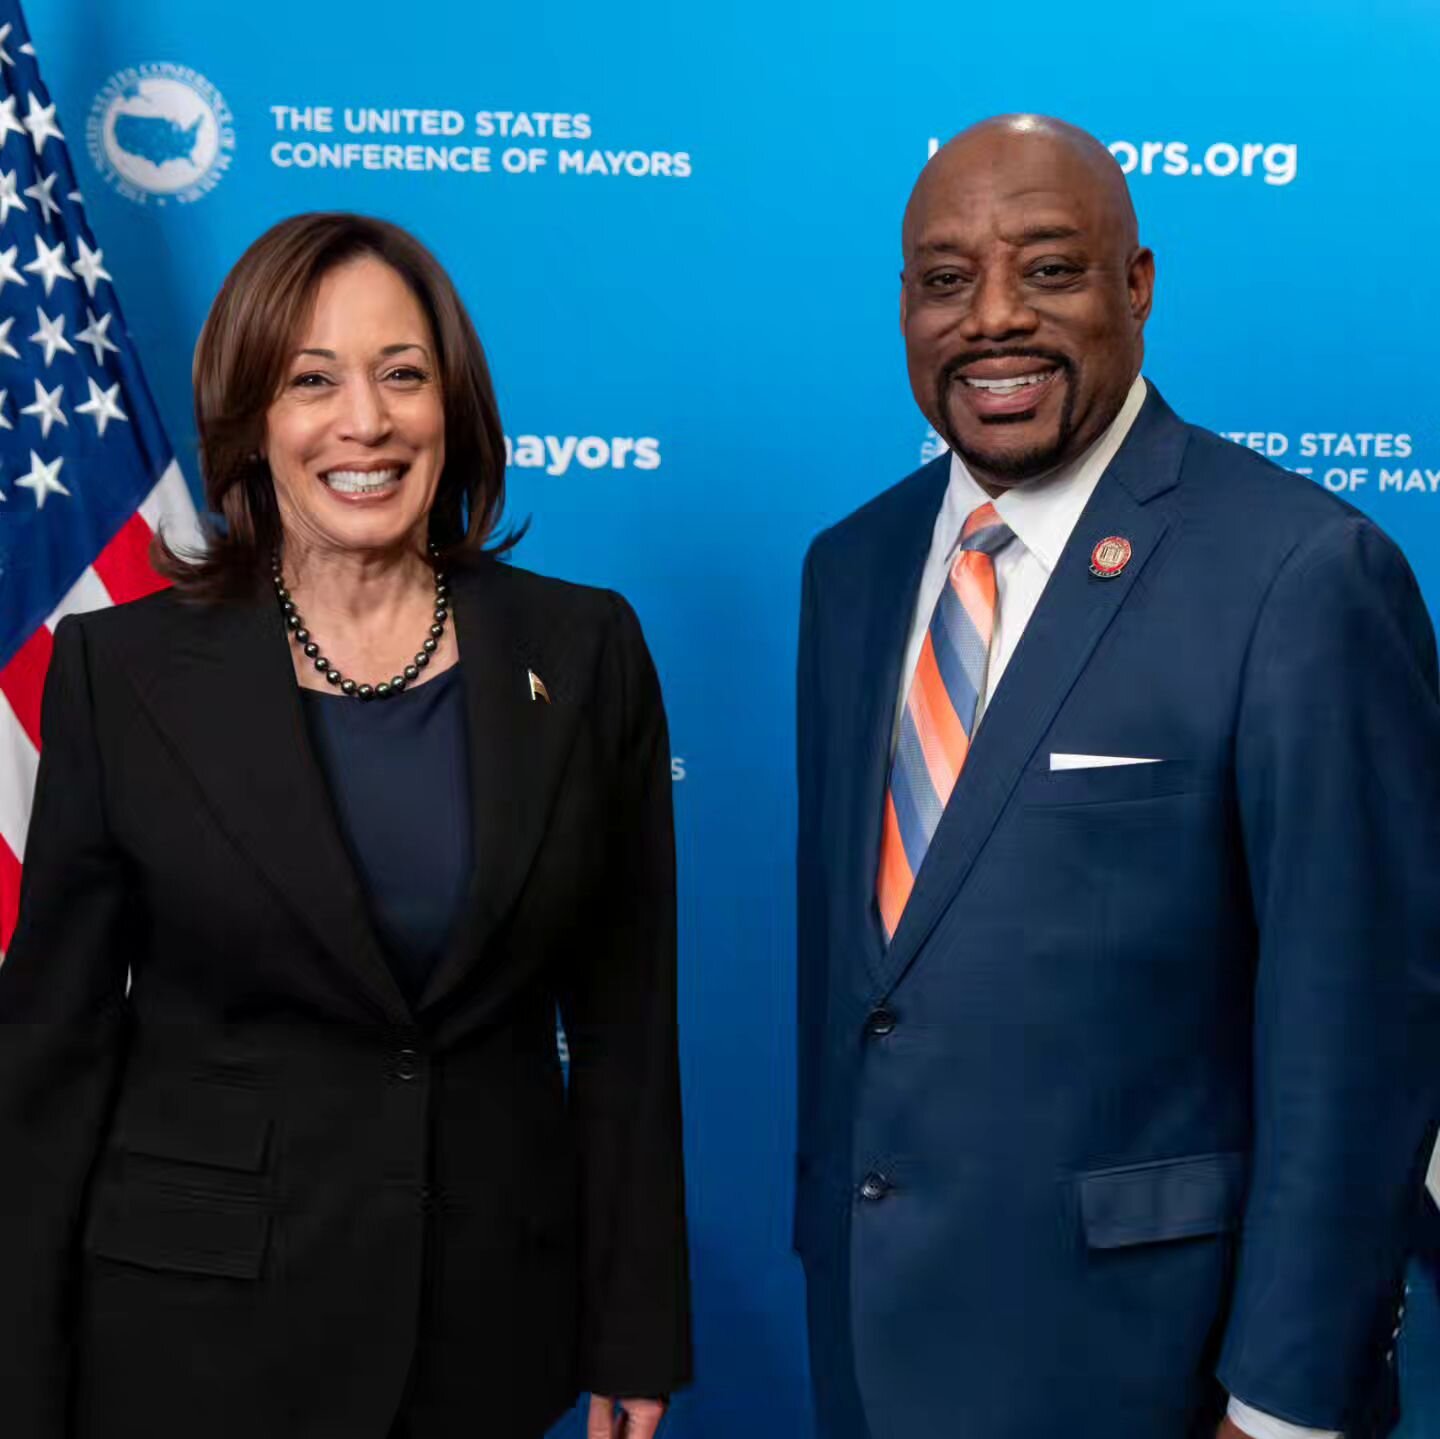 The City of Savannah will welcome Vice President of the United States Kamala Harris, who will be visiting the city on Tuesday, Feb. 6.

&ldquo;As the Hostess City of the South and one of the Southeast&rsquo;s leading cities, we could not be more exci